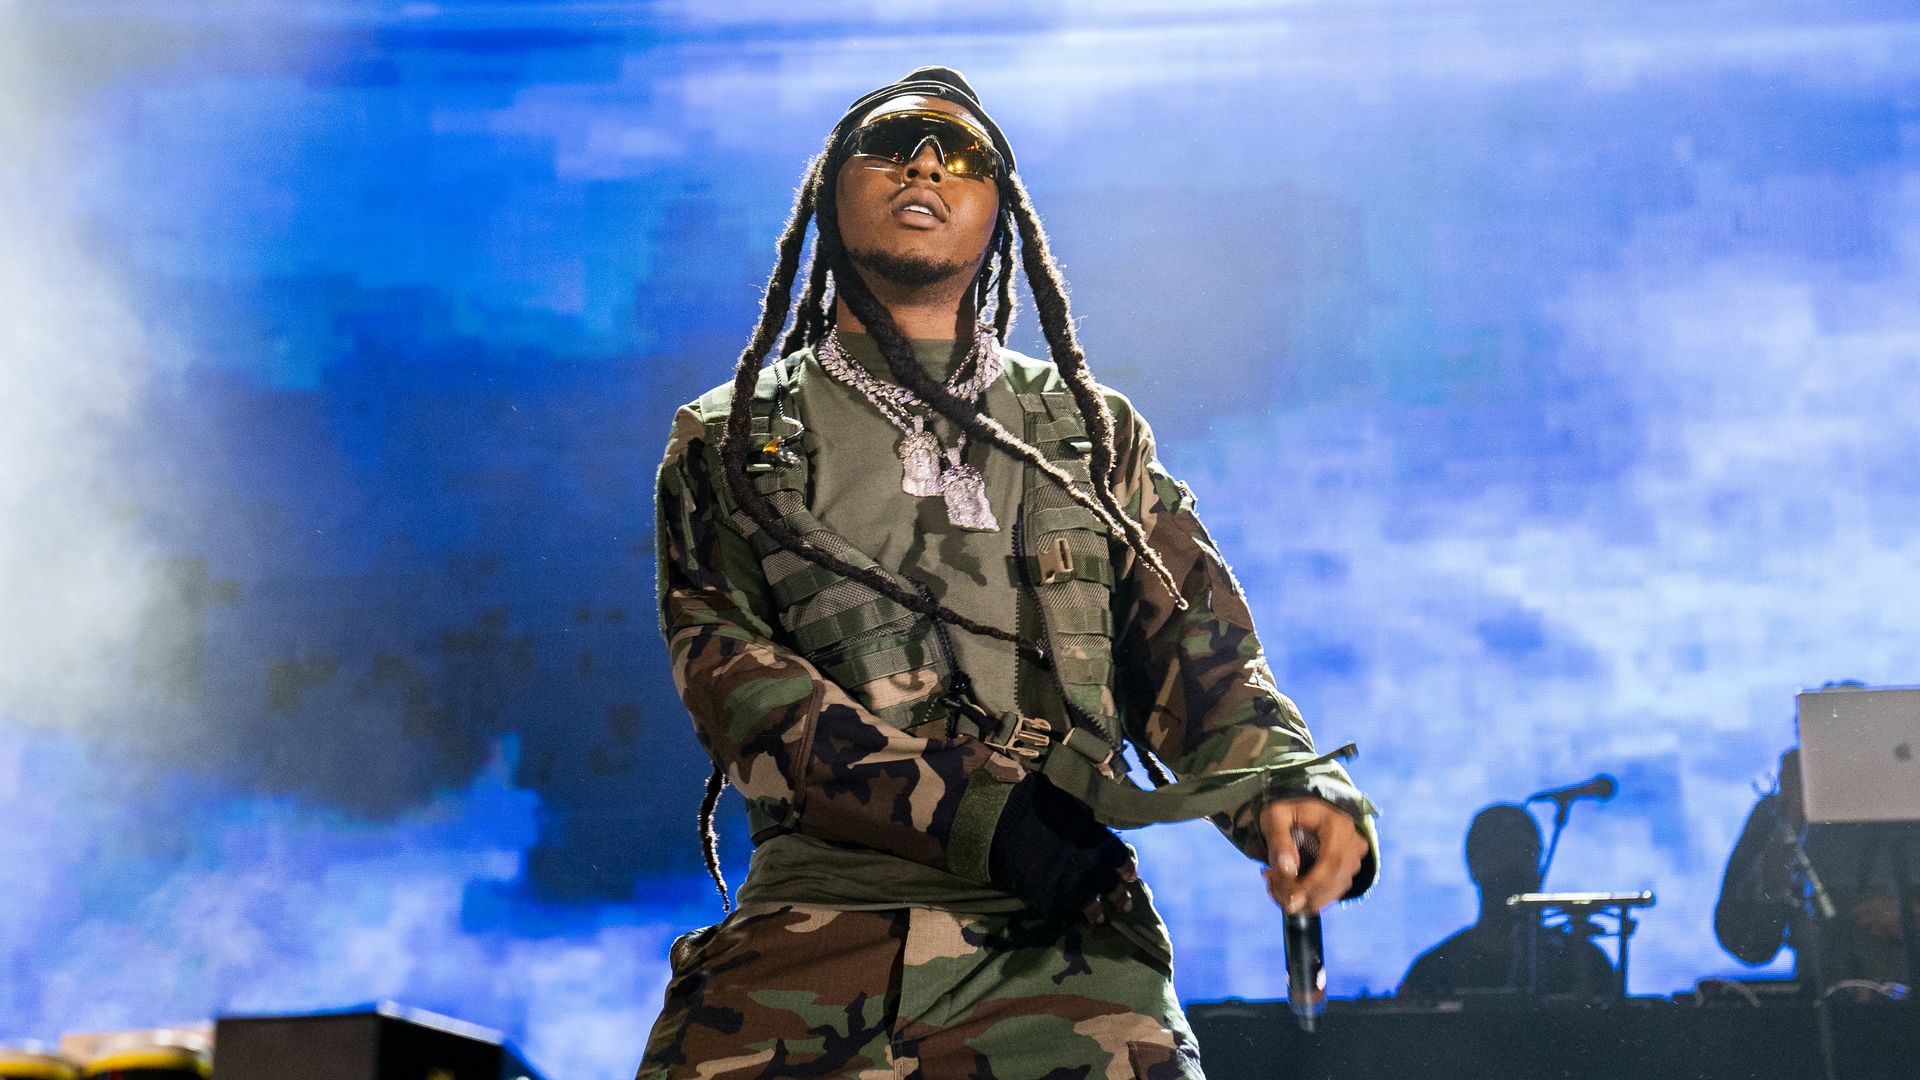 Rapper Takeoff performing on stage, in front of a blue screen. 